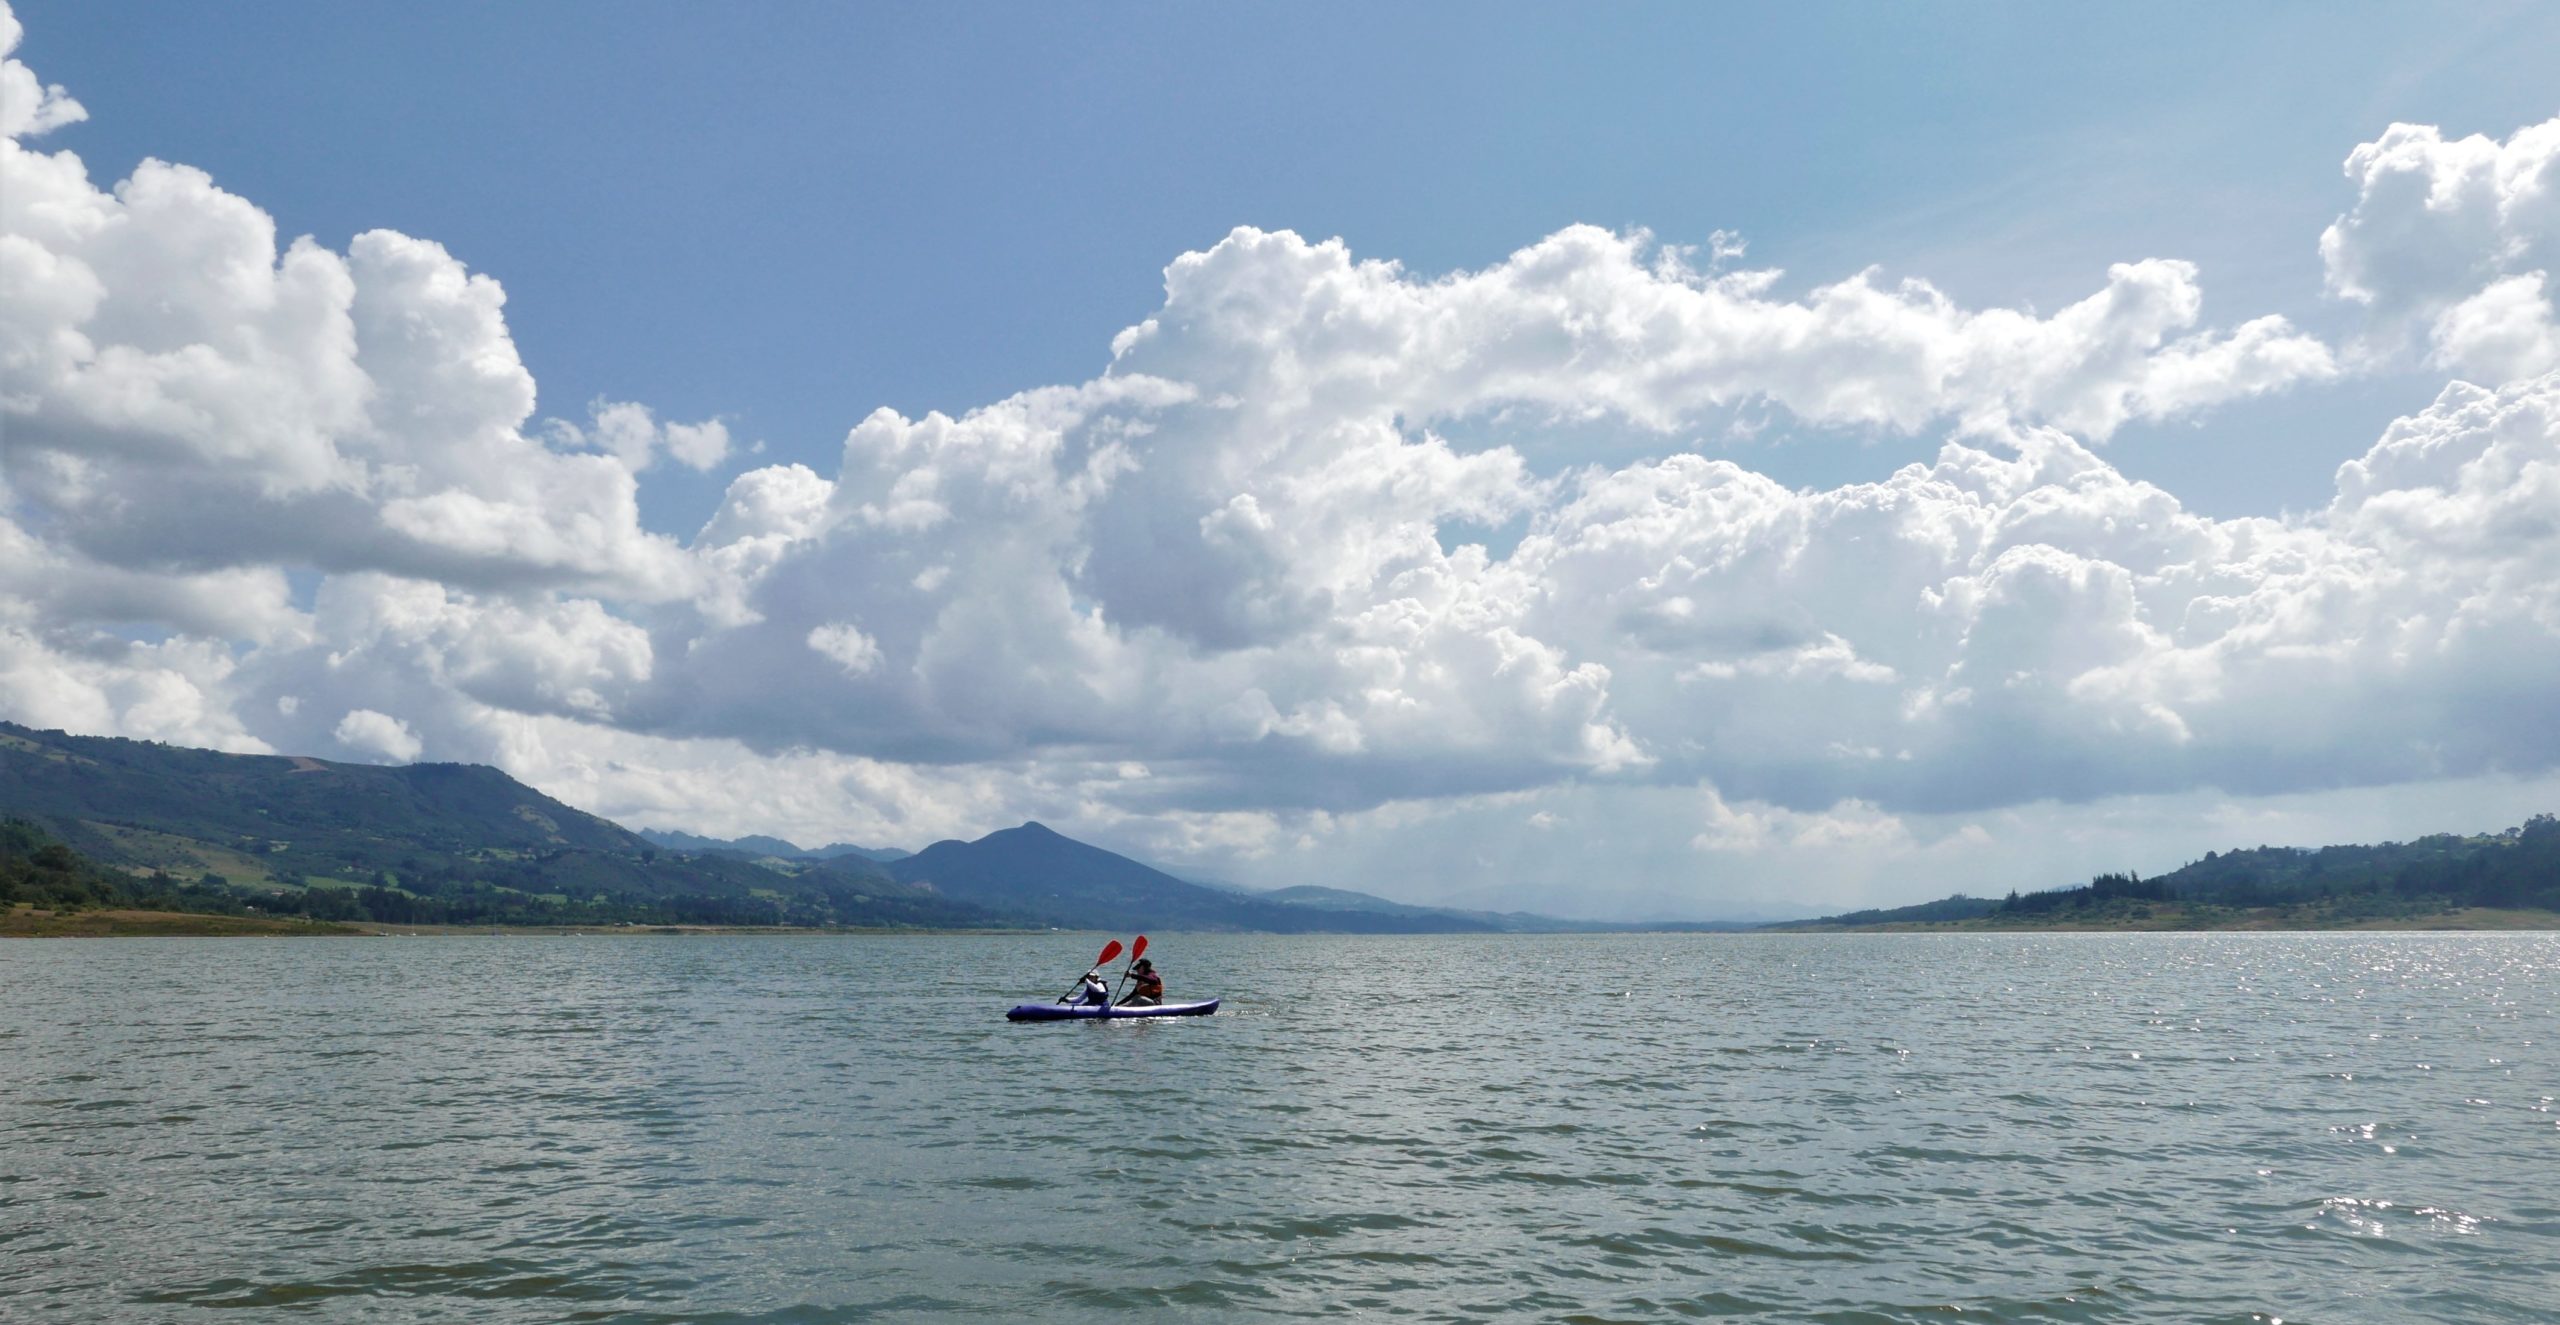 Canoeing on Embalse de Tominé